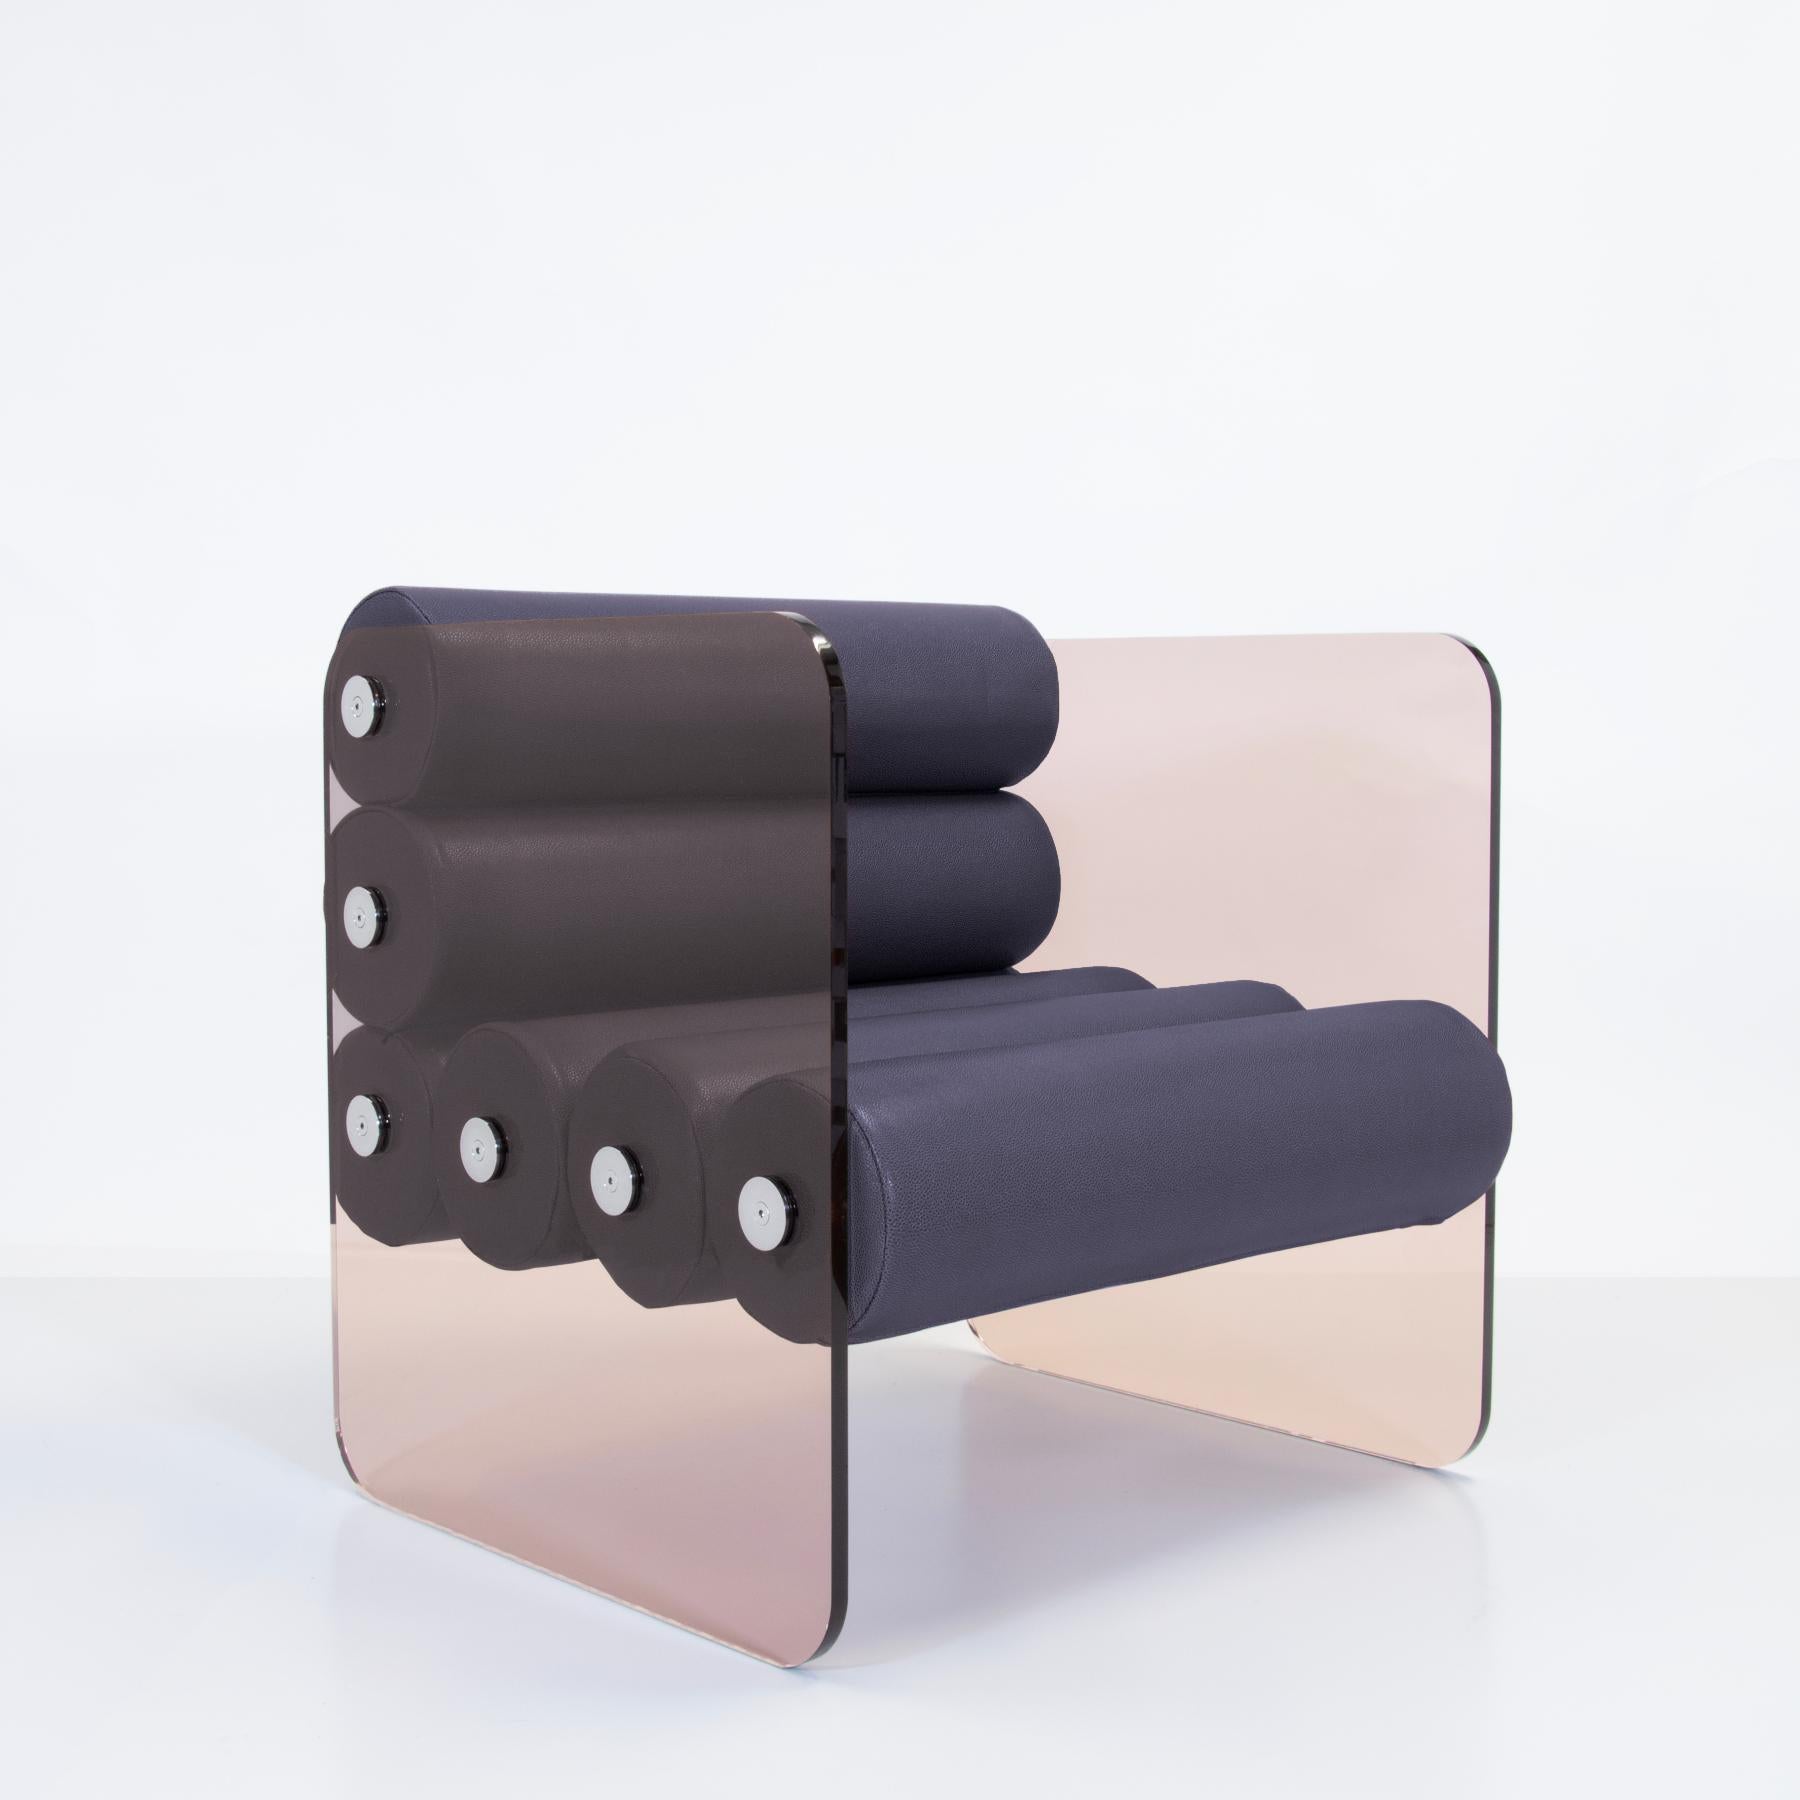 French Design armchair Mw01 bronze, made in France, designed by Olivier Santini For Sale